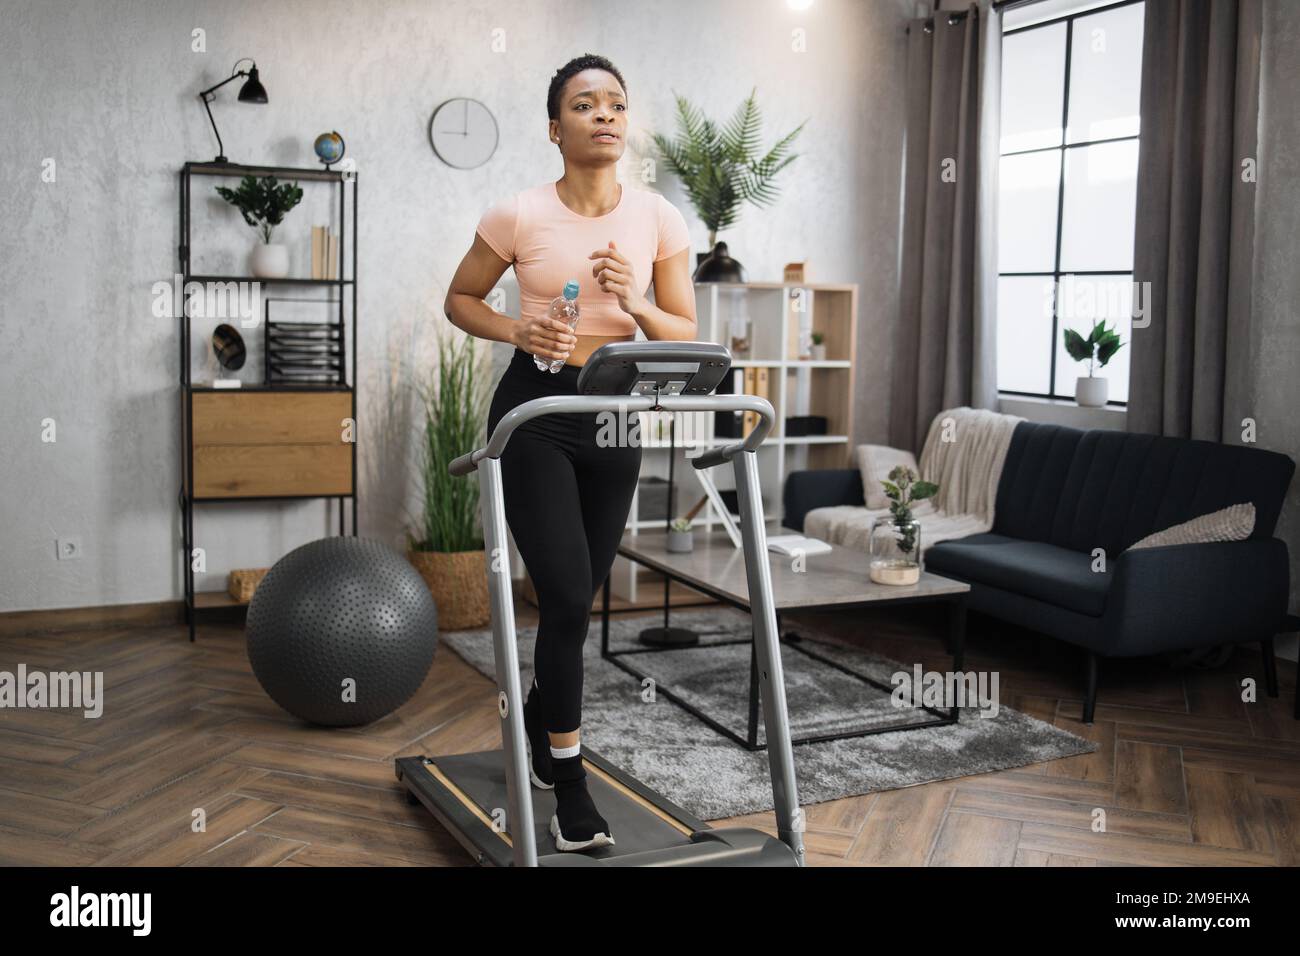 https://c8.alamy.com/comp/2M9EHXA/portrait-of-active-and-dynamic-young-charming-thirsty-african-woman-holding-water-bottle-doing-sport-fitness-at-home-running-on-treadmill-indoor-tone-your-body-perfect-shape-improving-endurance-2M9EHXA.jpg